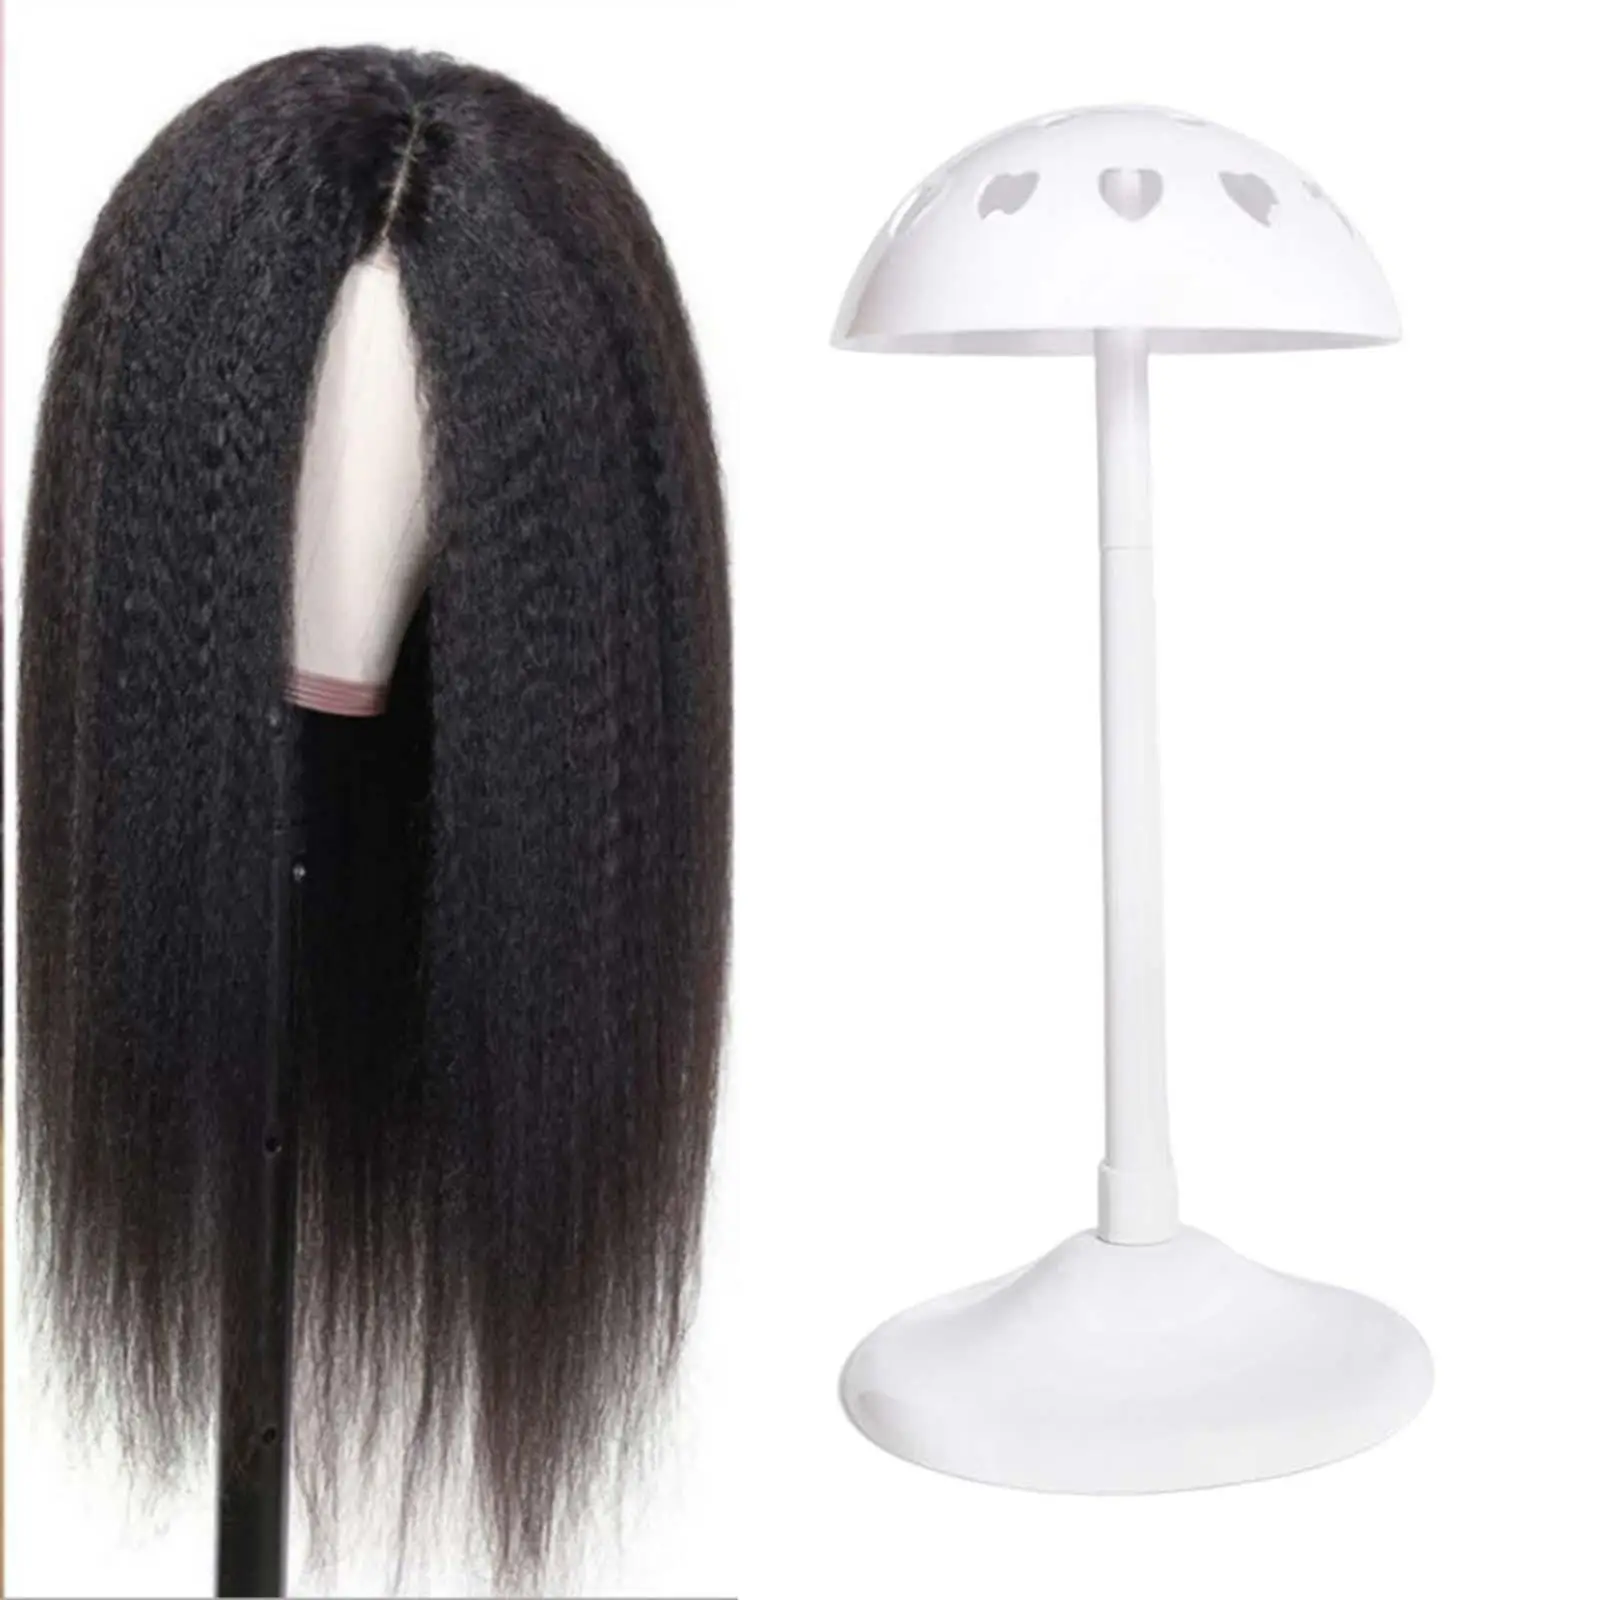 PP Wig Hat Display Stand Adjustable Height Practical Round Stable Bottom for Hairdresser Barber